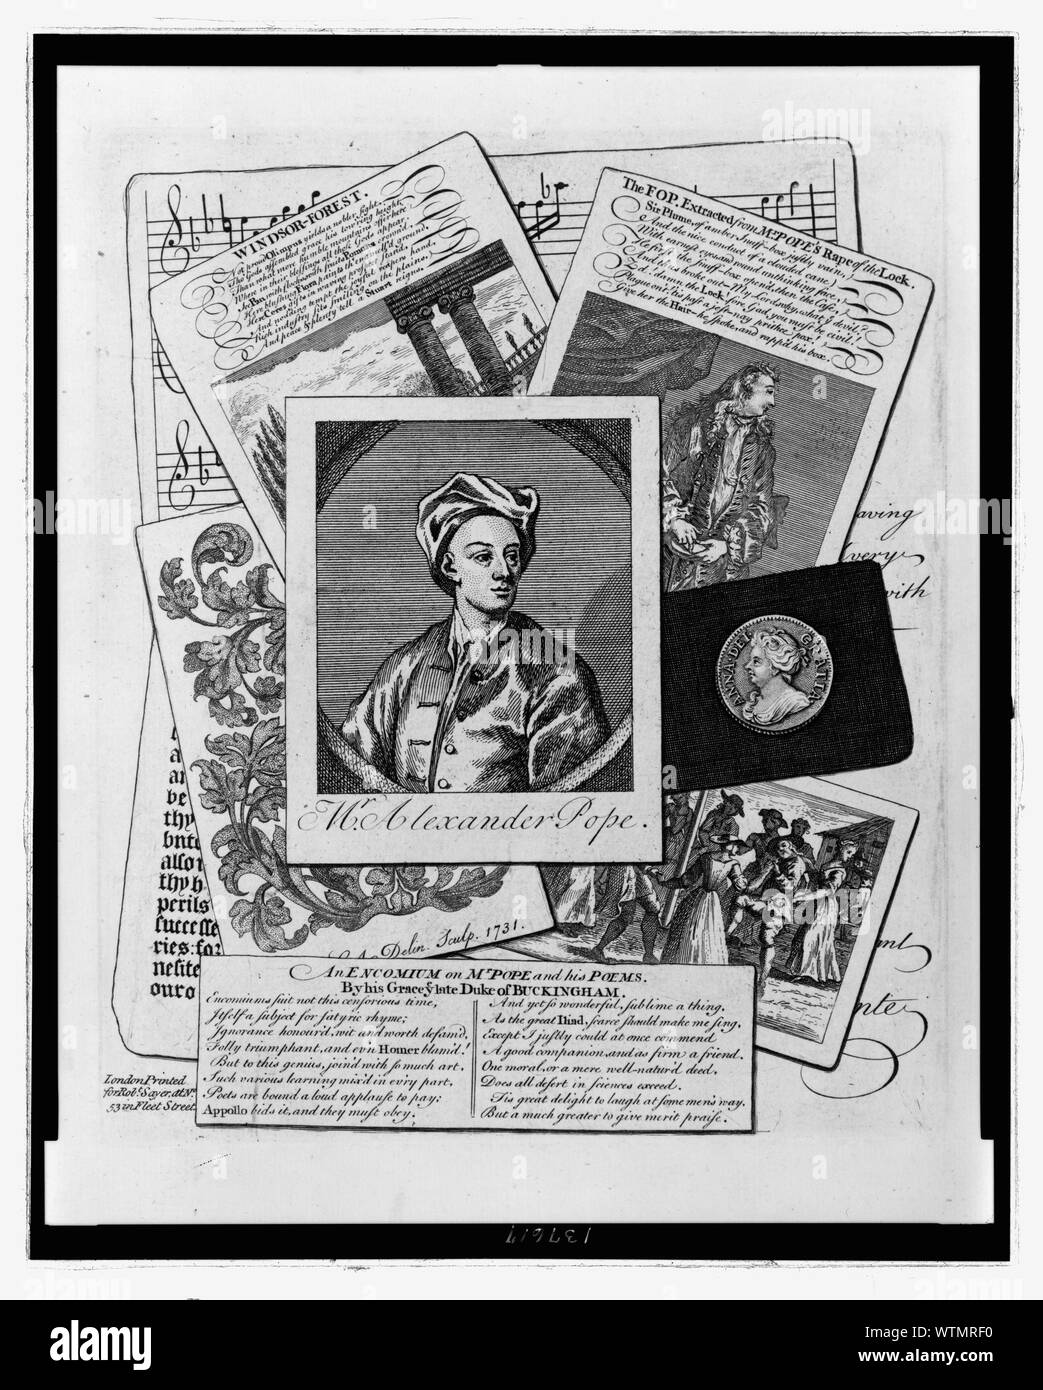 Mr. Alexander Pope  Medley print  shows pictures lying as if carelessly placed one over the other. All images relate to Alexander Pope. The center image is a portrait of Pope.  Underneath the images is An Encomium on Mr. Pope and his poems. By his Grace ye late Duke of Buckingham. Stock Photo